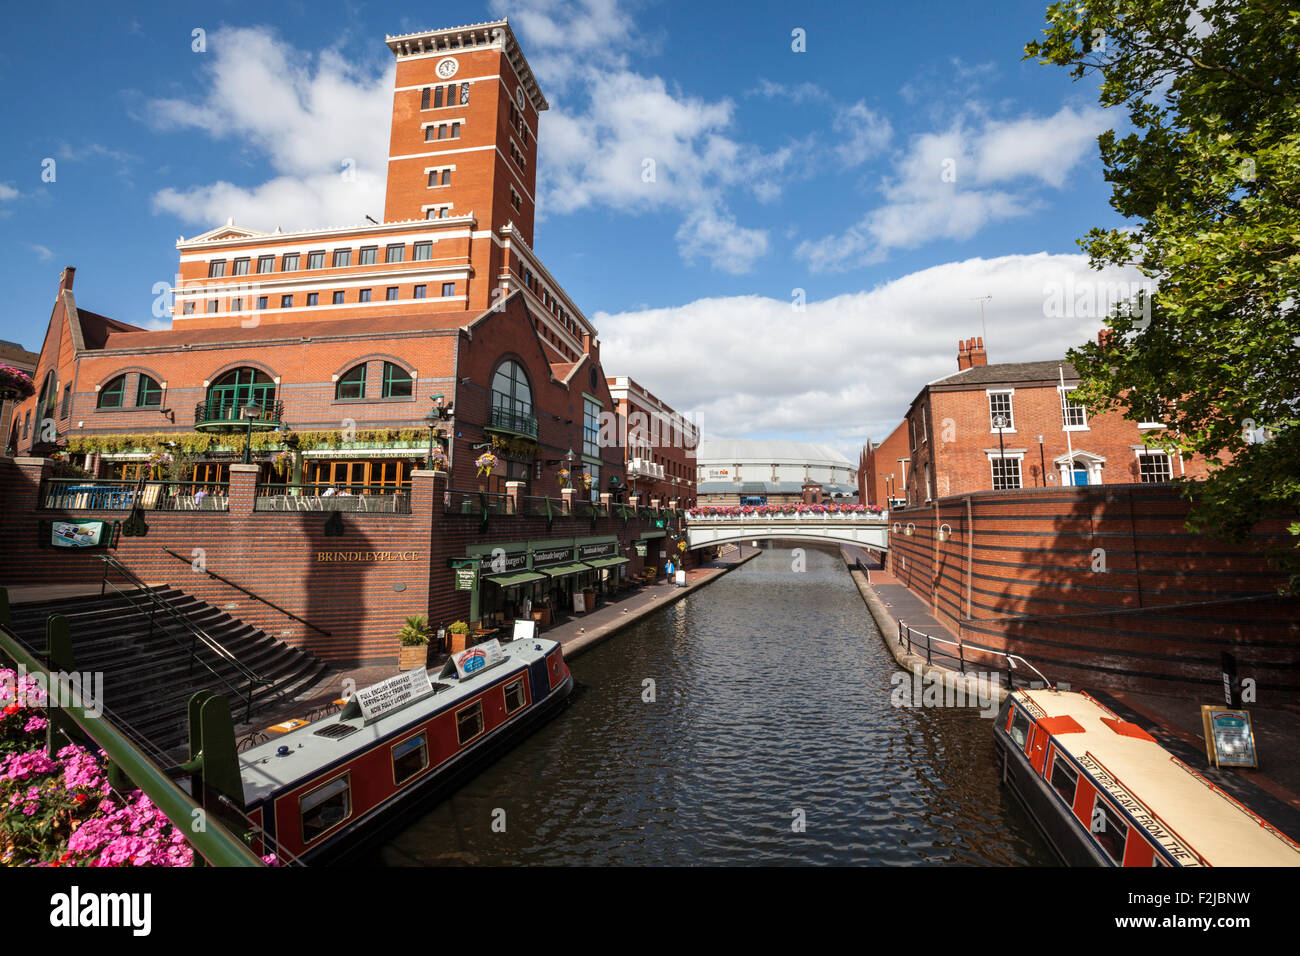 The bridge over the canal at Brindley Place looking towards the NIA in Birmingham, England Stock Photo